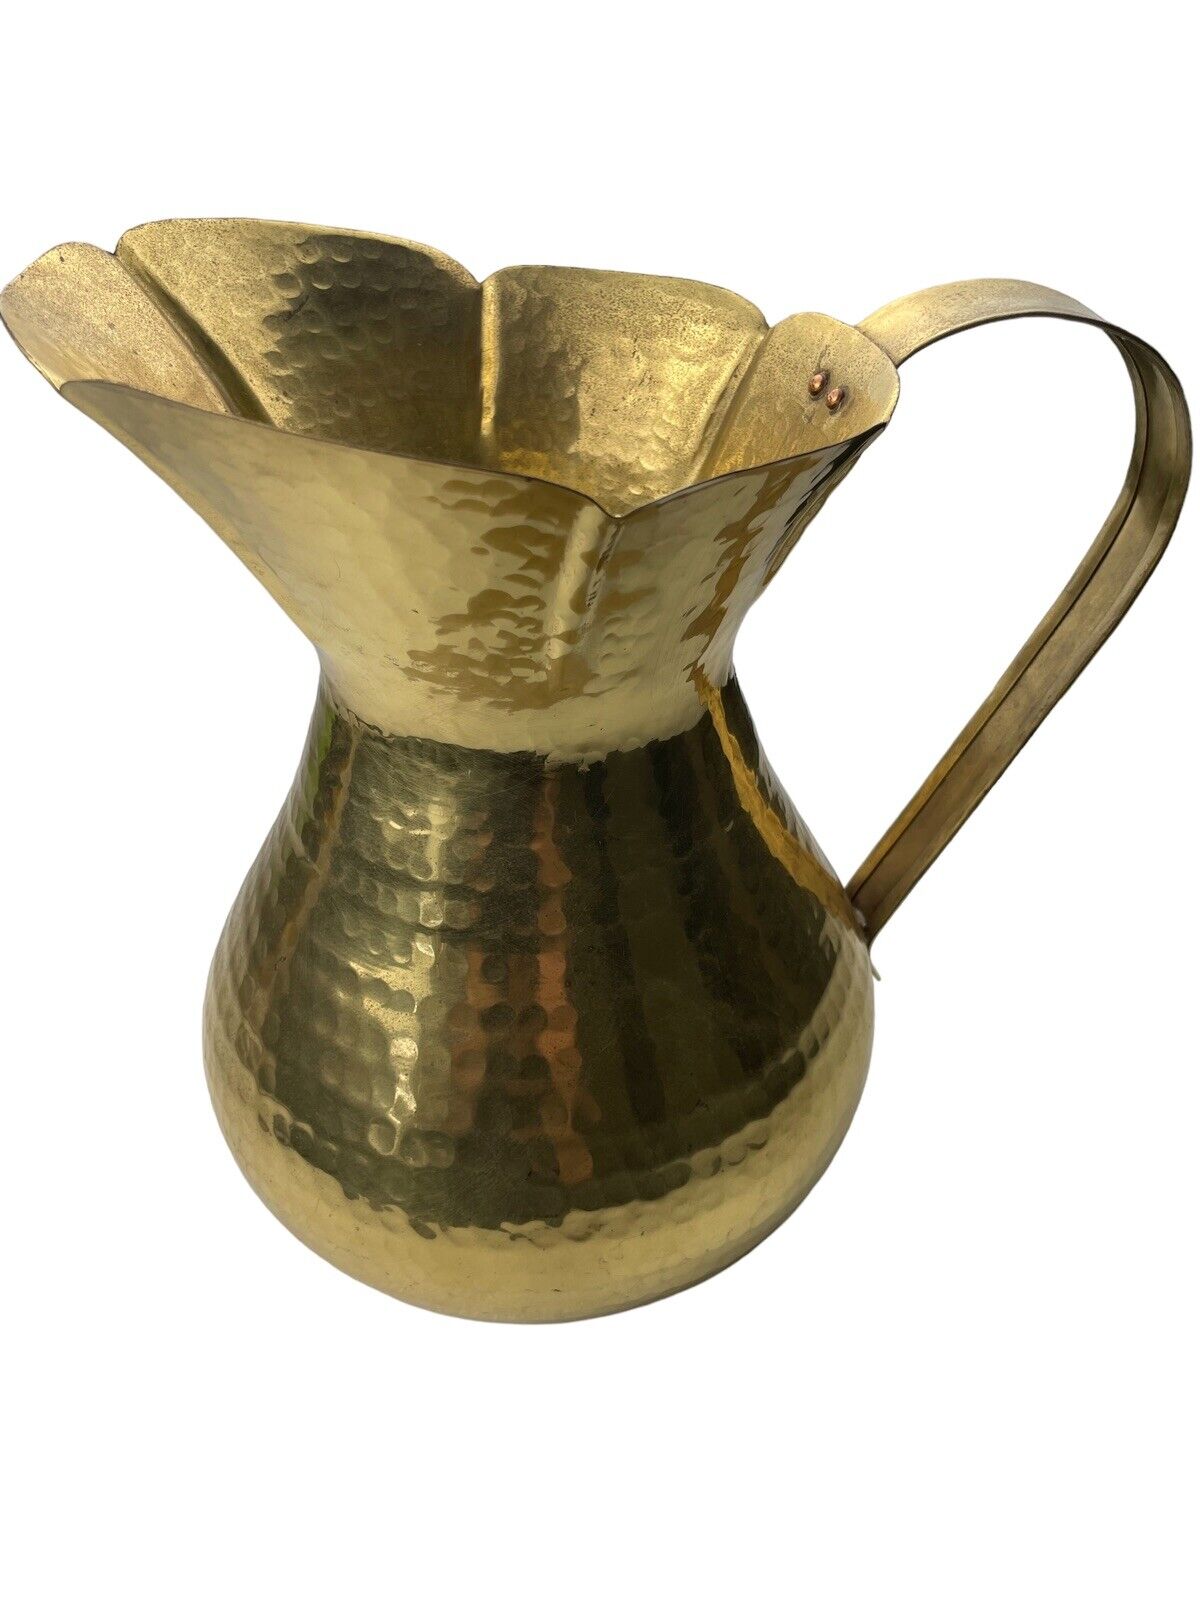 Large Hammered Brass Pitcher 11.75” Tall 12” Wide, Gold Tone